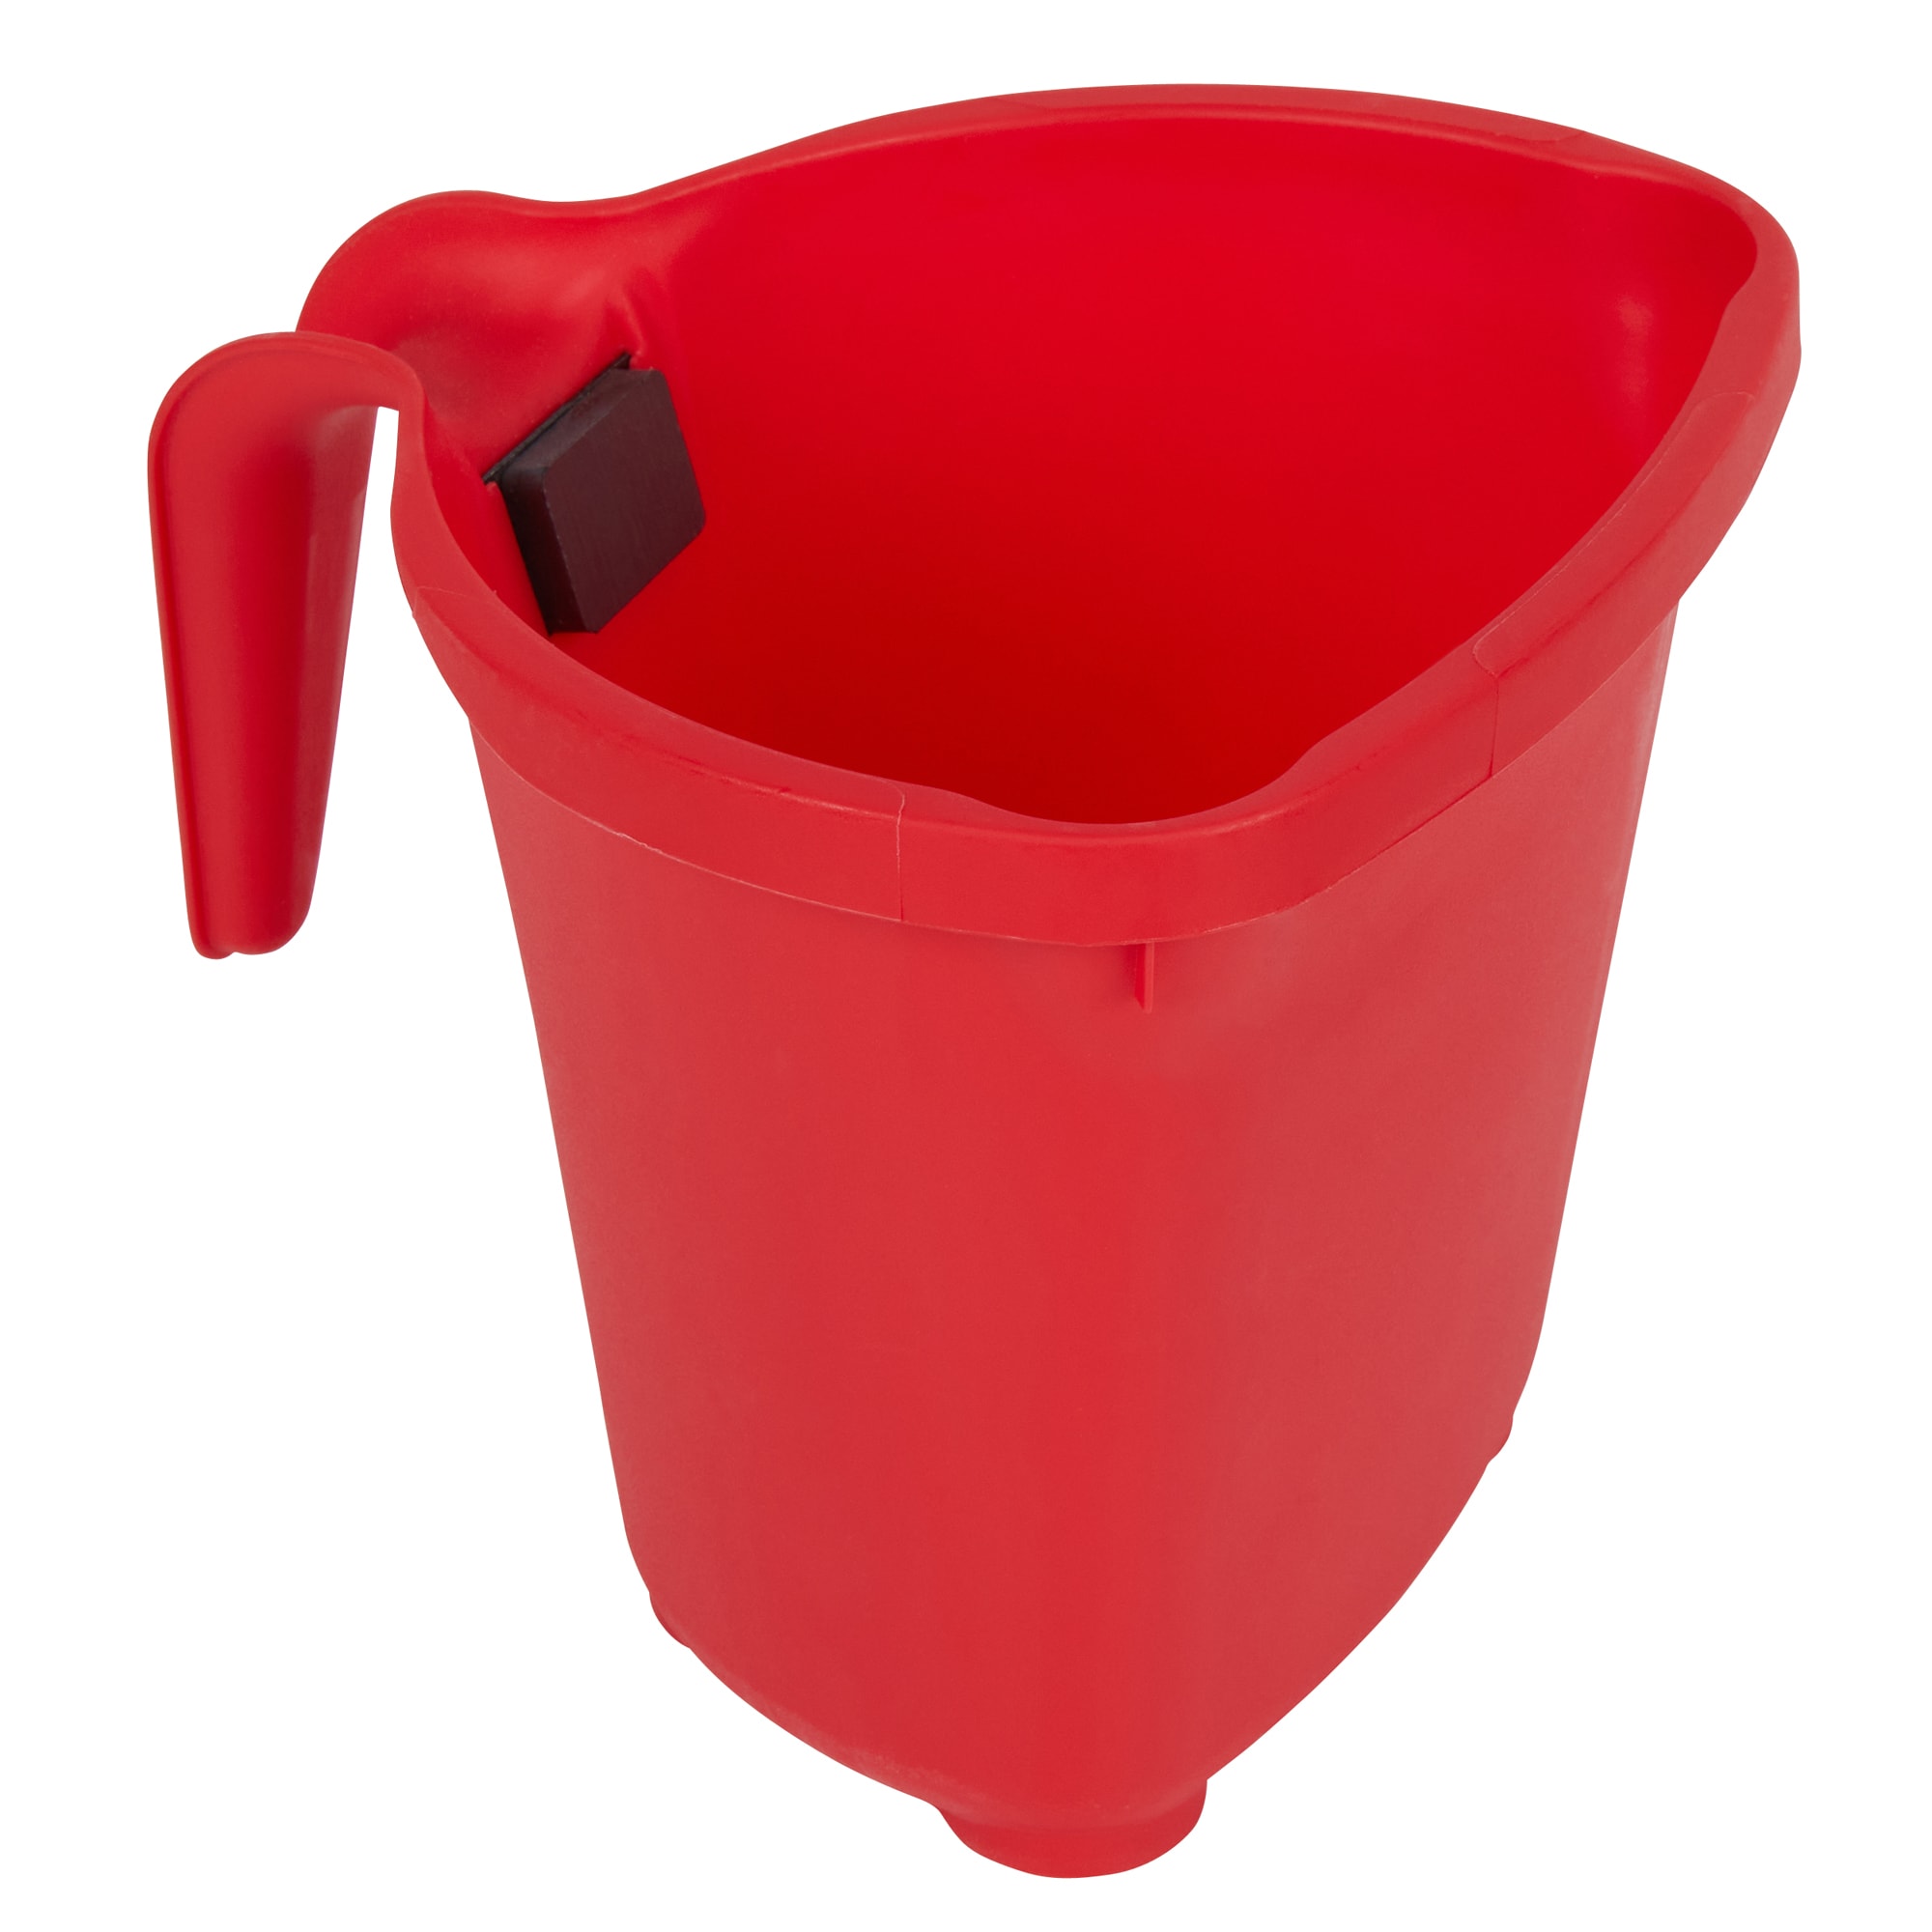 HANDy 32 oz. Solvent Resistant Paint Pail with Liner, Magnetic Brush Holder  and Adjustable Strap in the Paint Pails department at